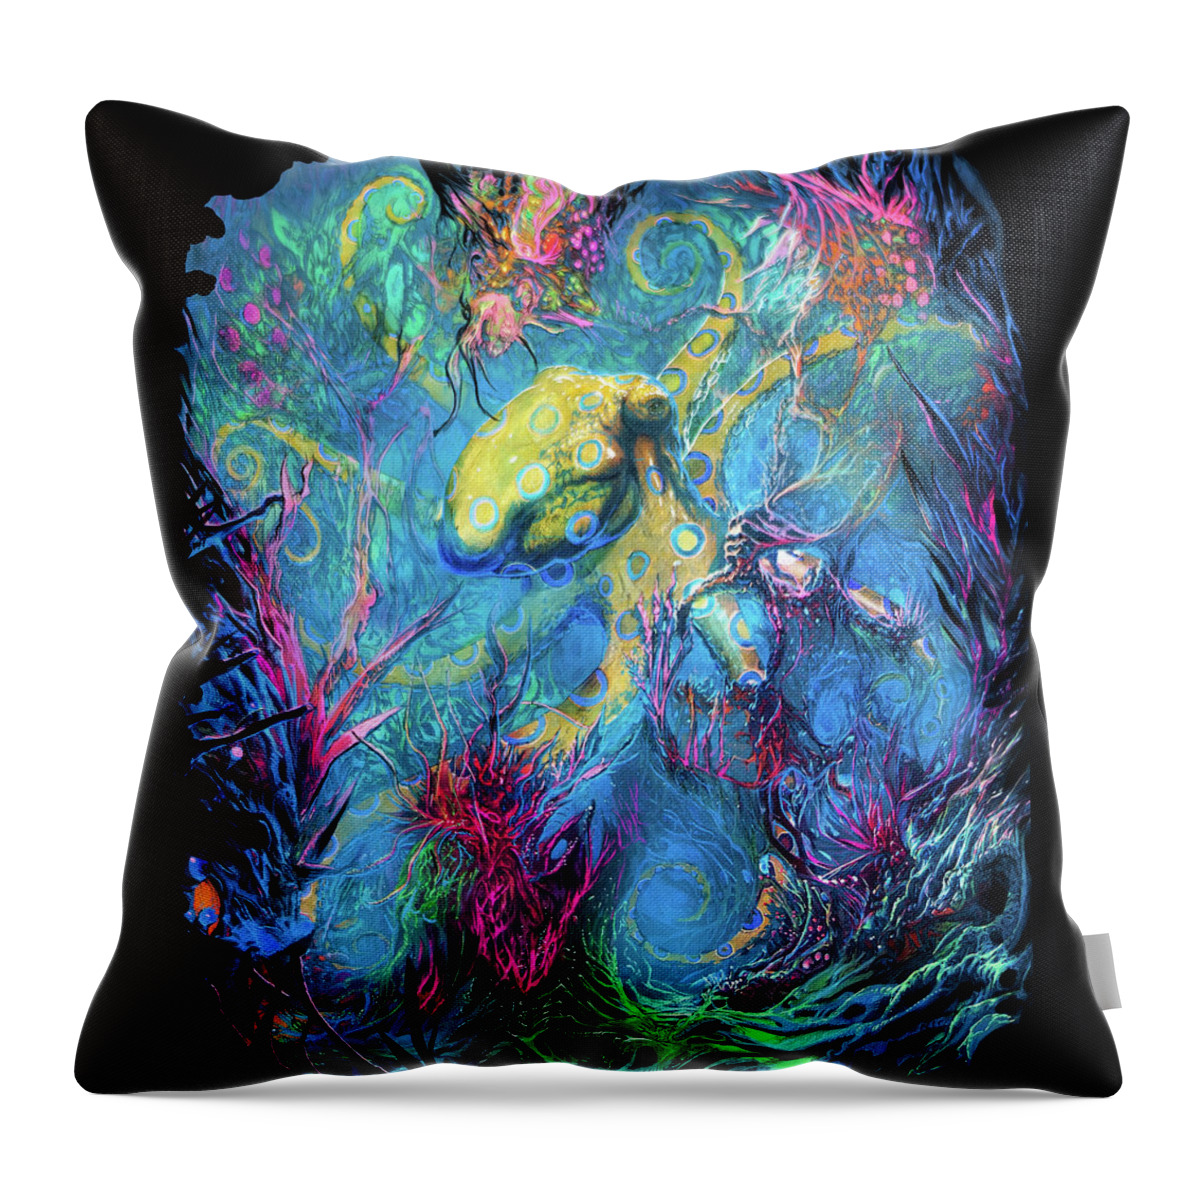 3:33 Throw Pillow featuring the painting Blue Ringed Octopus by Will Shanklin